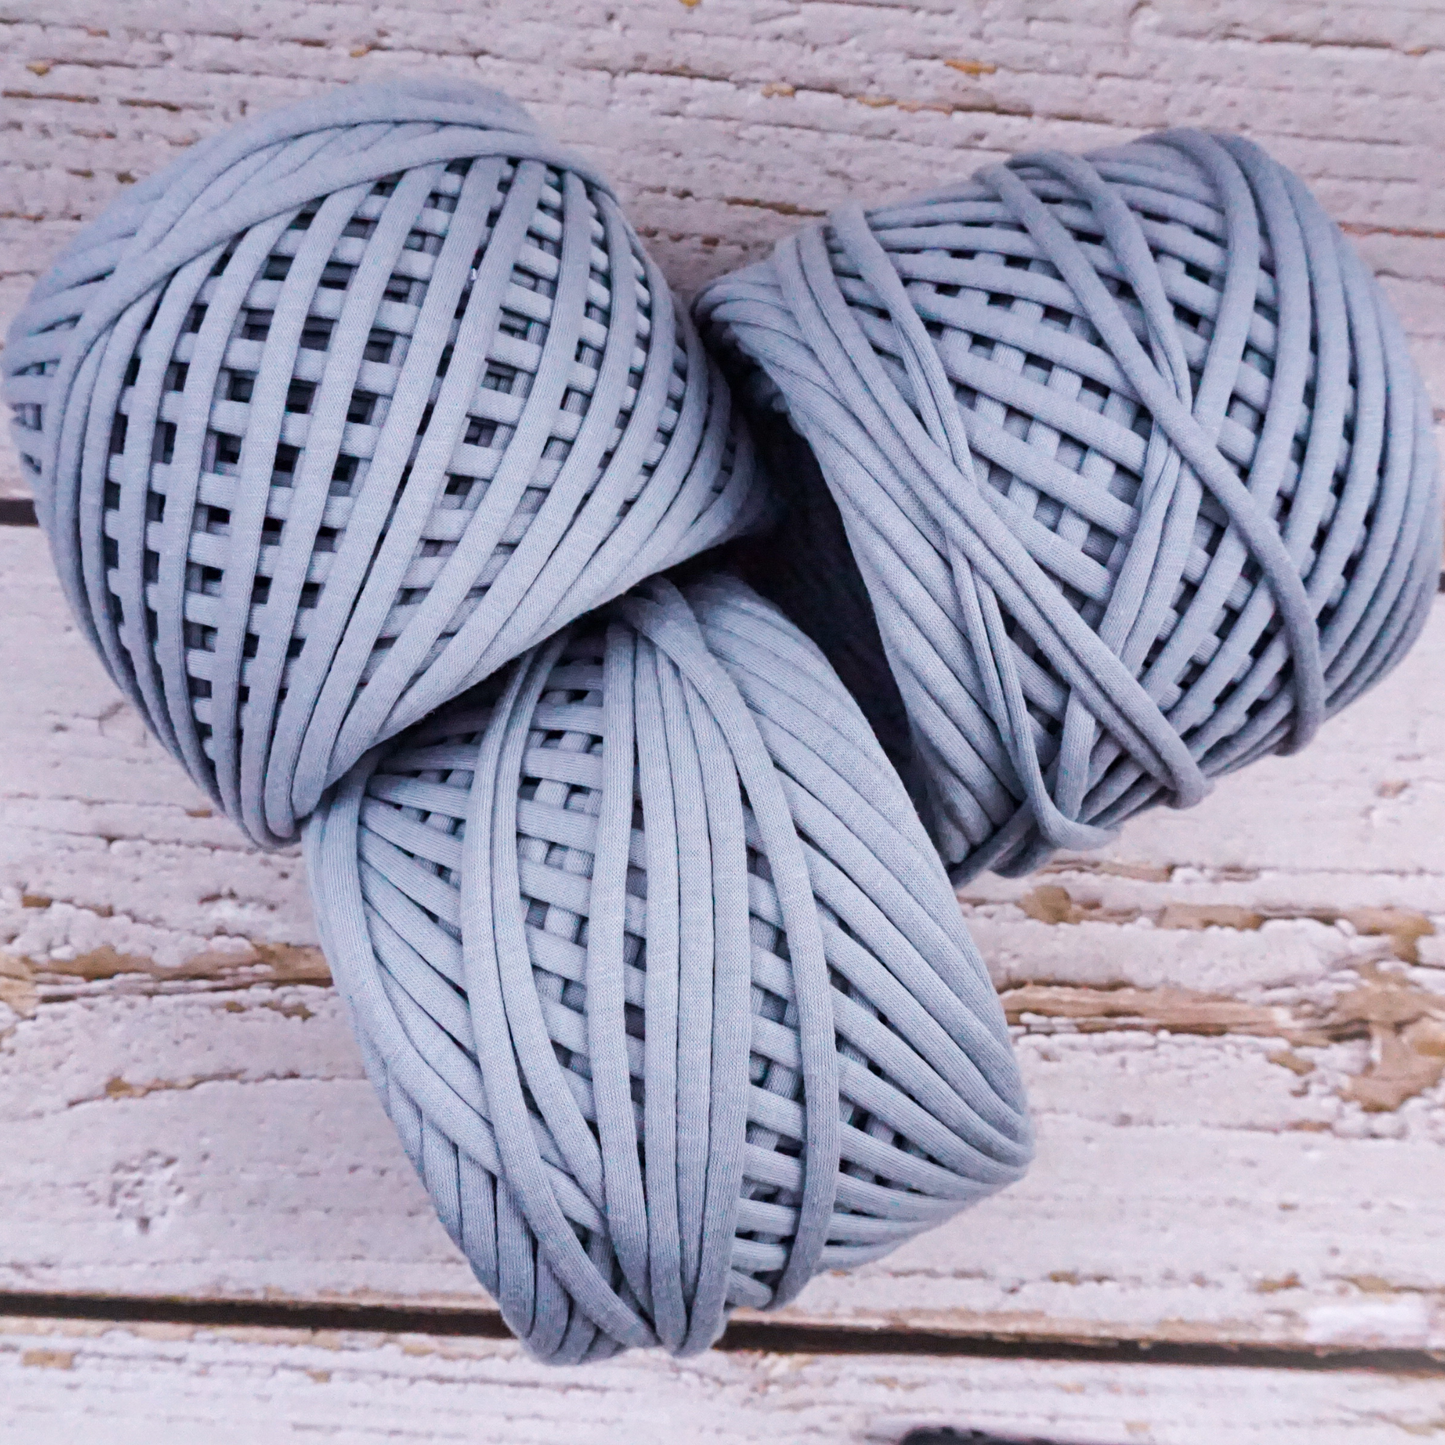 T-shirt yarn for crocheting baskets, bags, rugs and home decor.  Grey